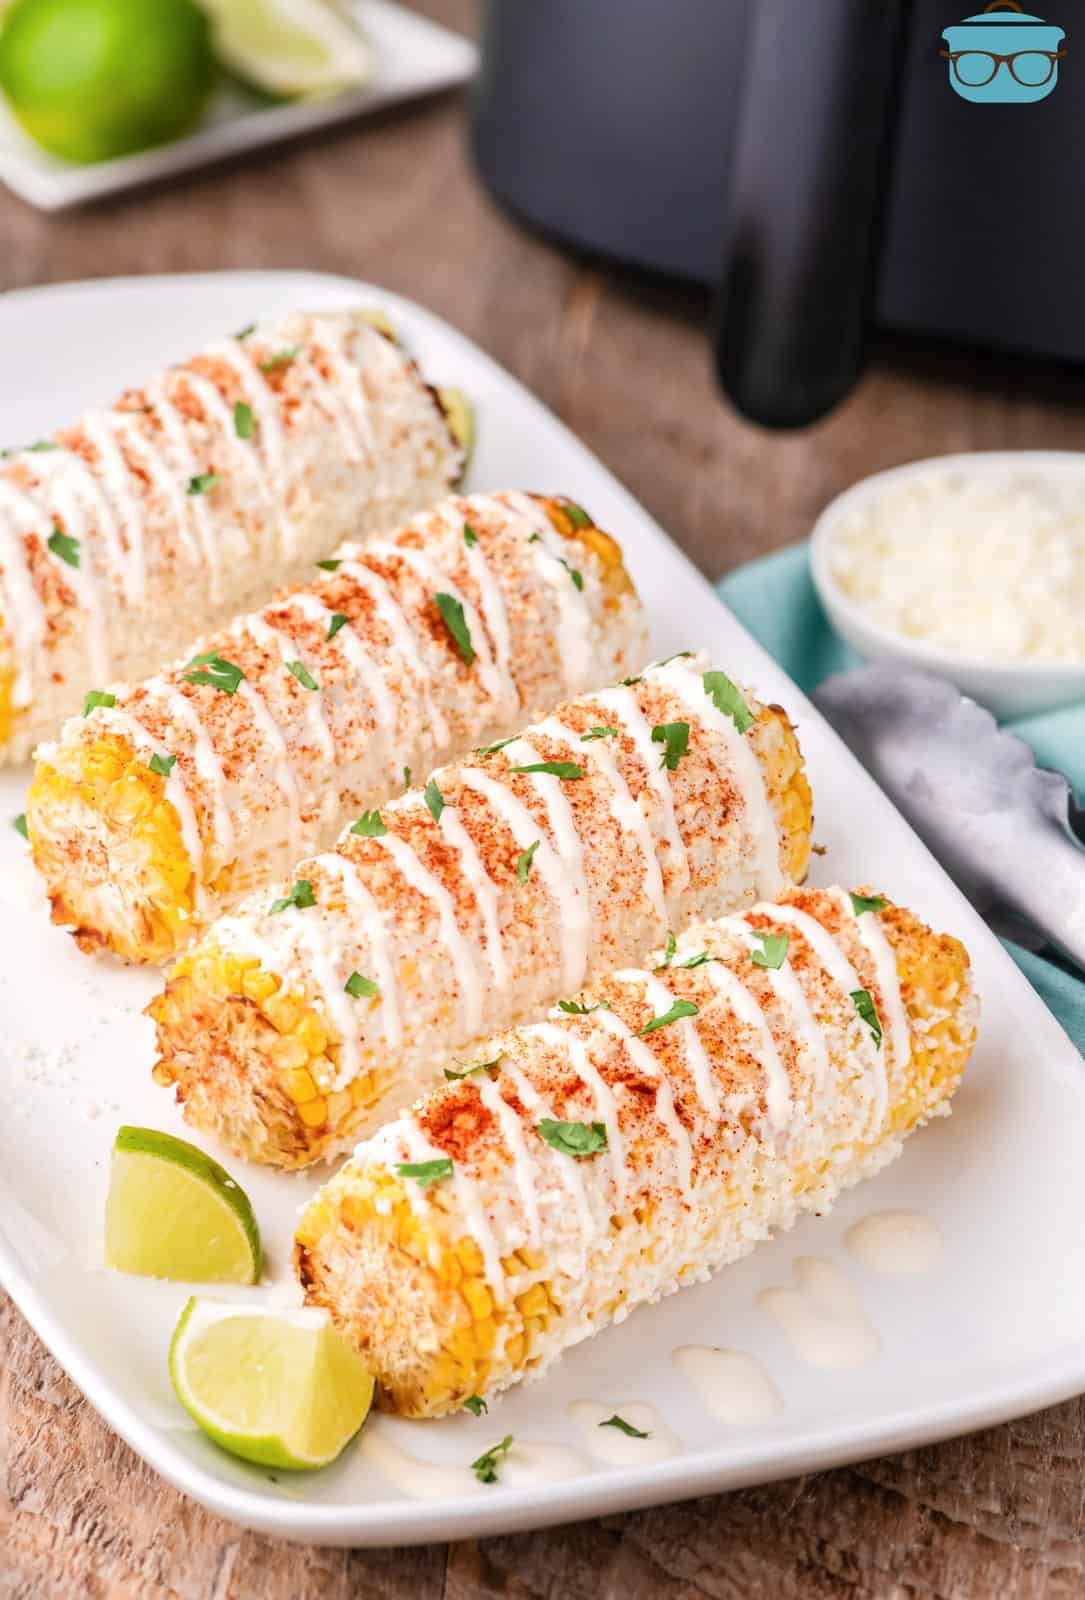 A plate with 4 pieces of Mexican Street Corn.